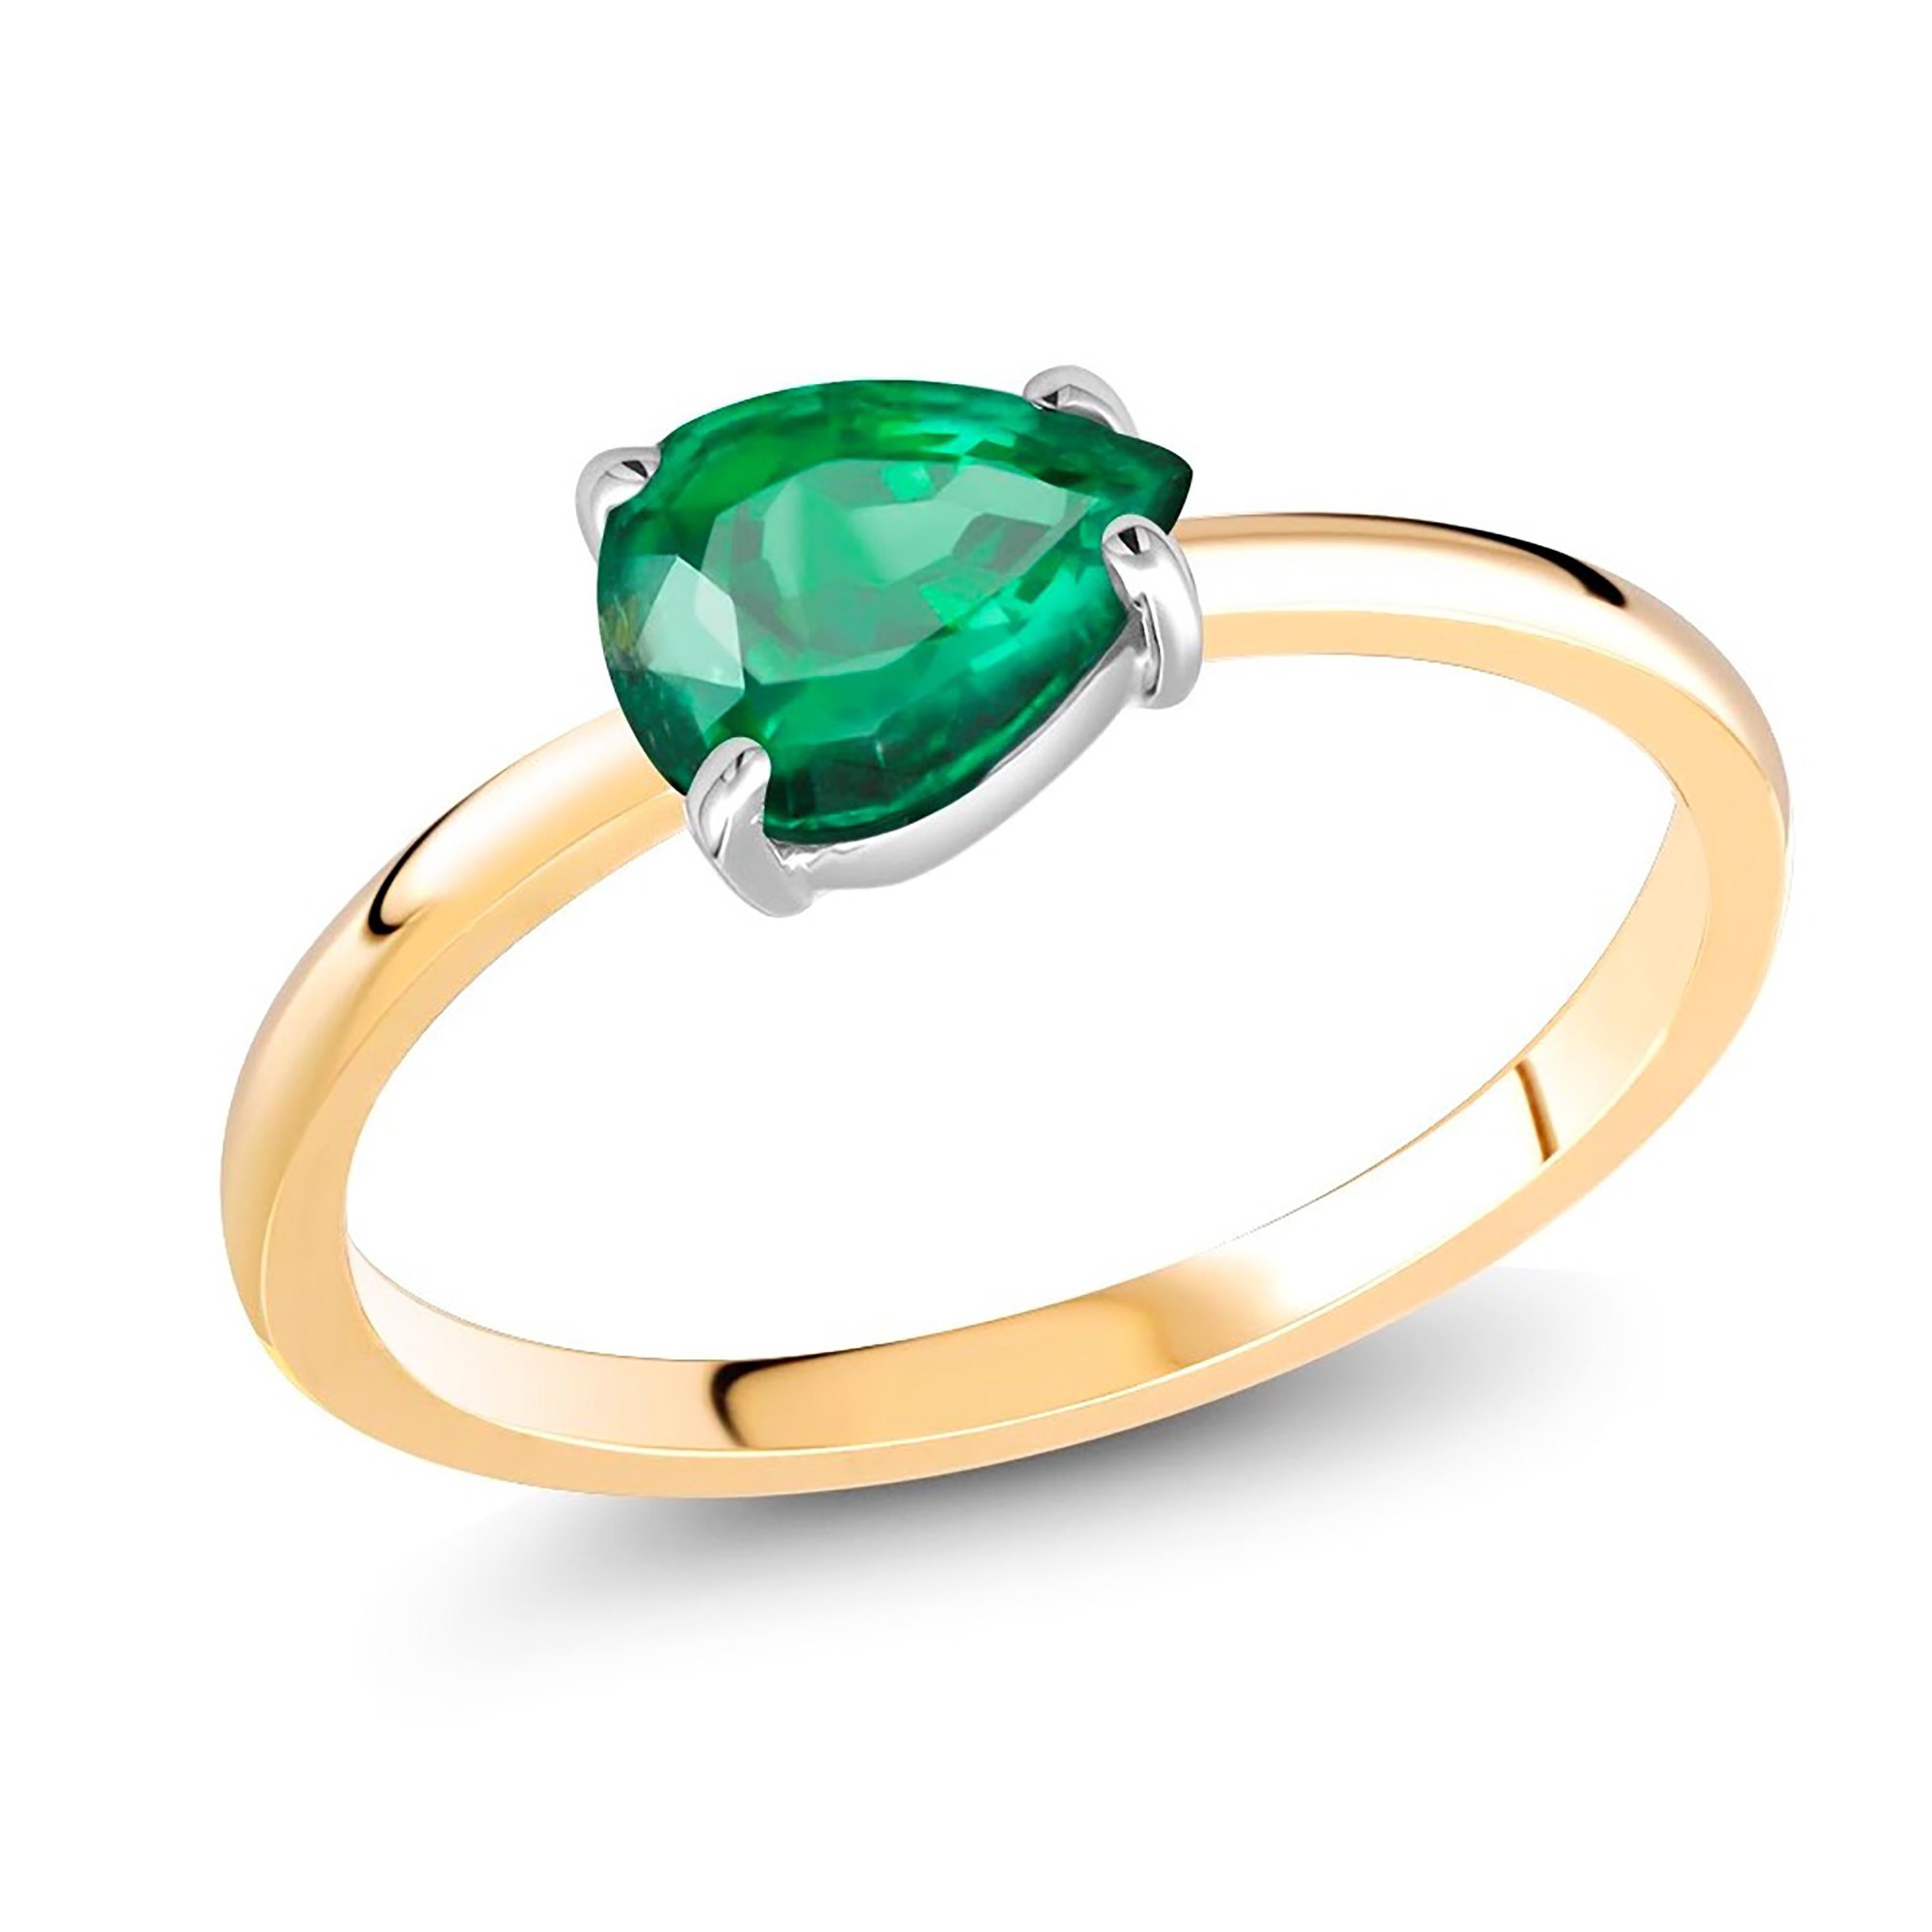 Pear Shaped Emerald Yellow and White Gold Cocktail Ring Weighing 1.20 Carat 2